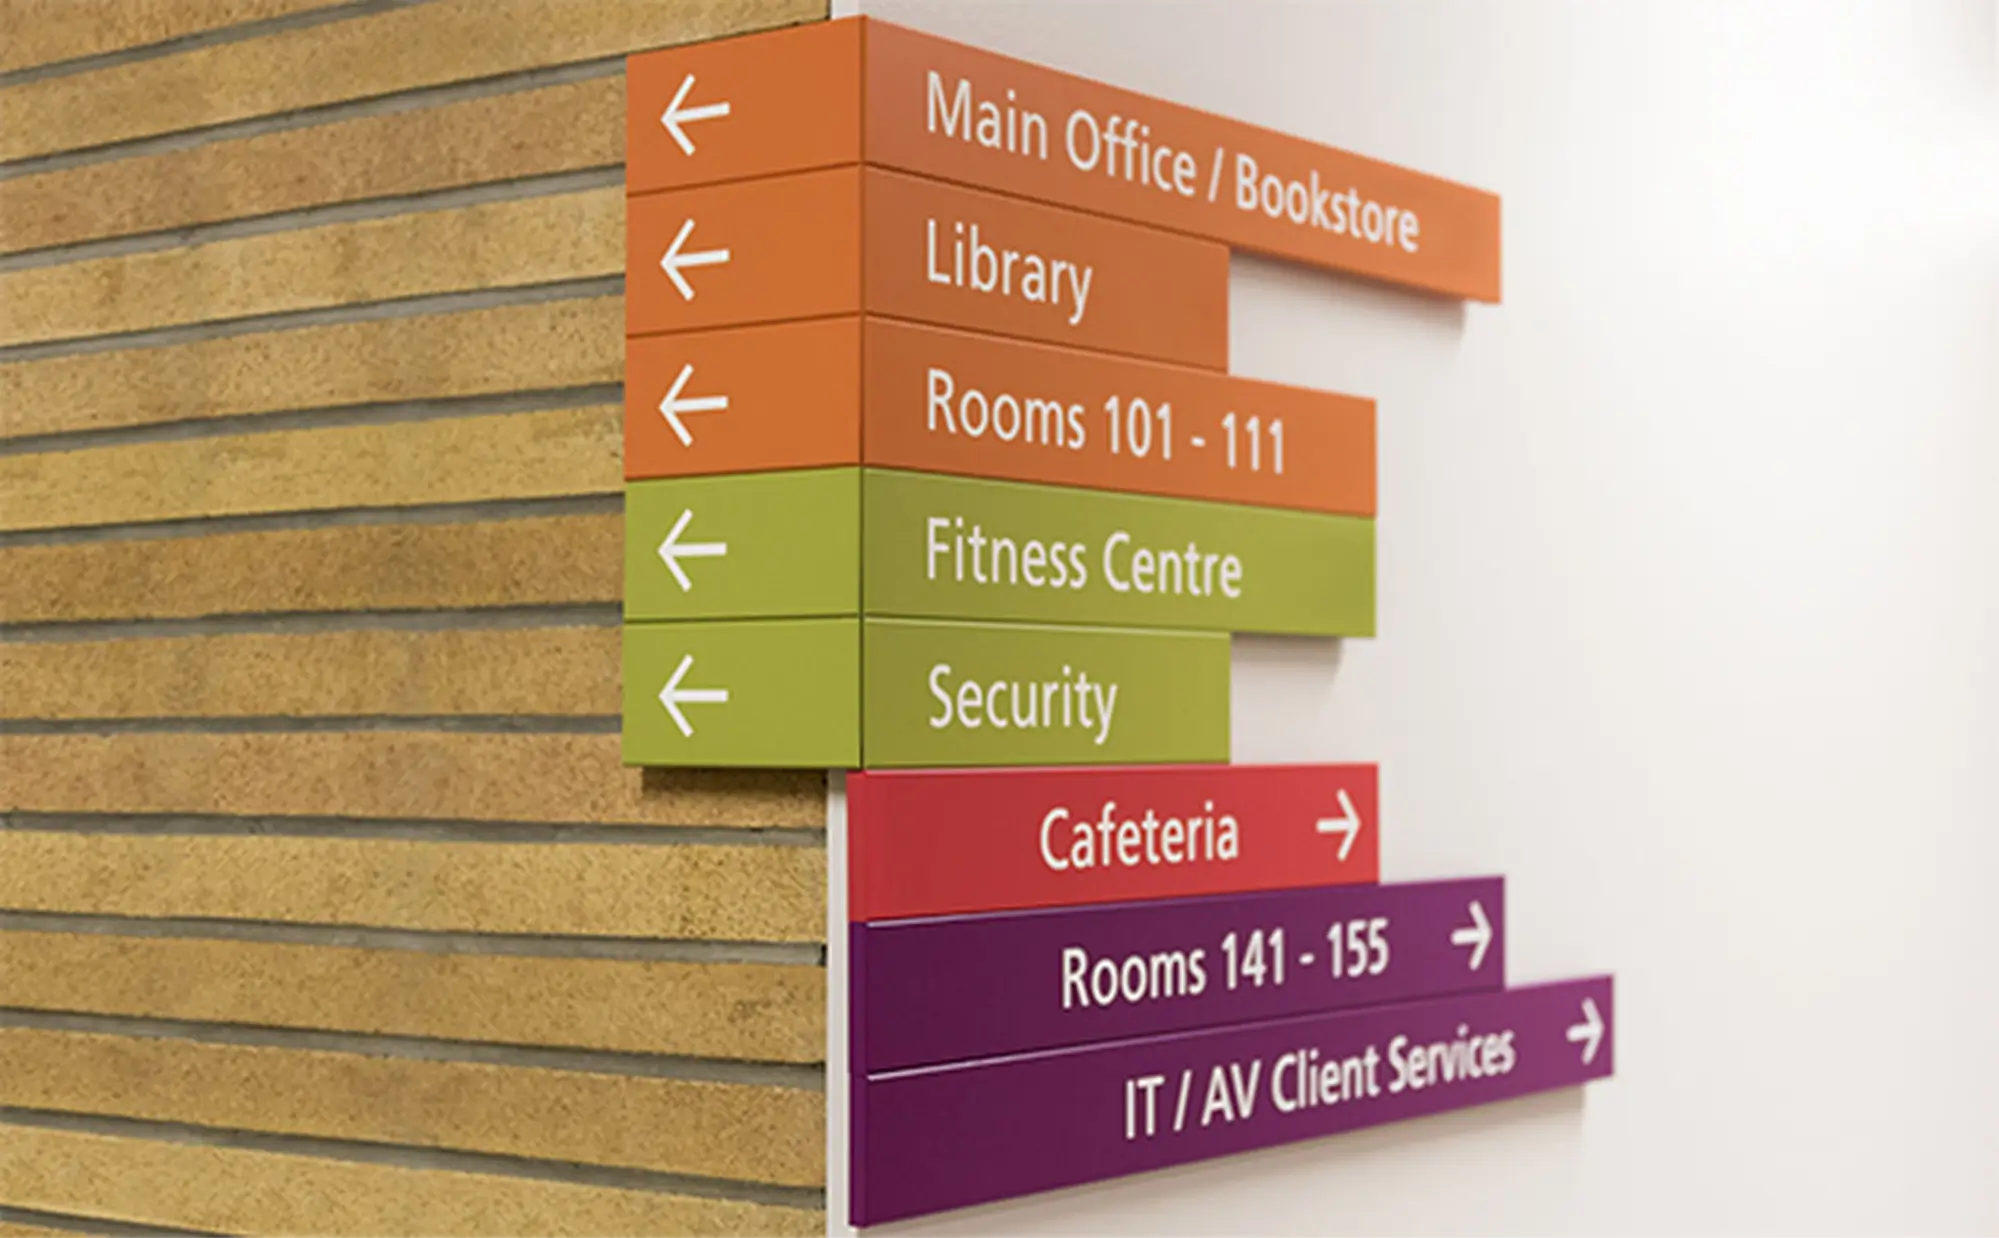 Colour Coding in Wayfinding